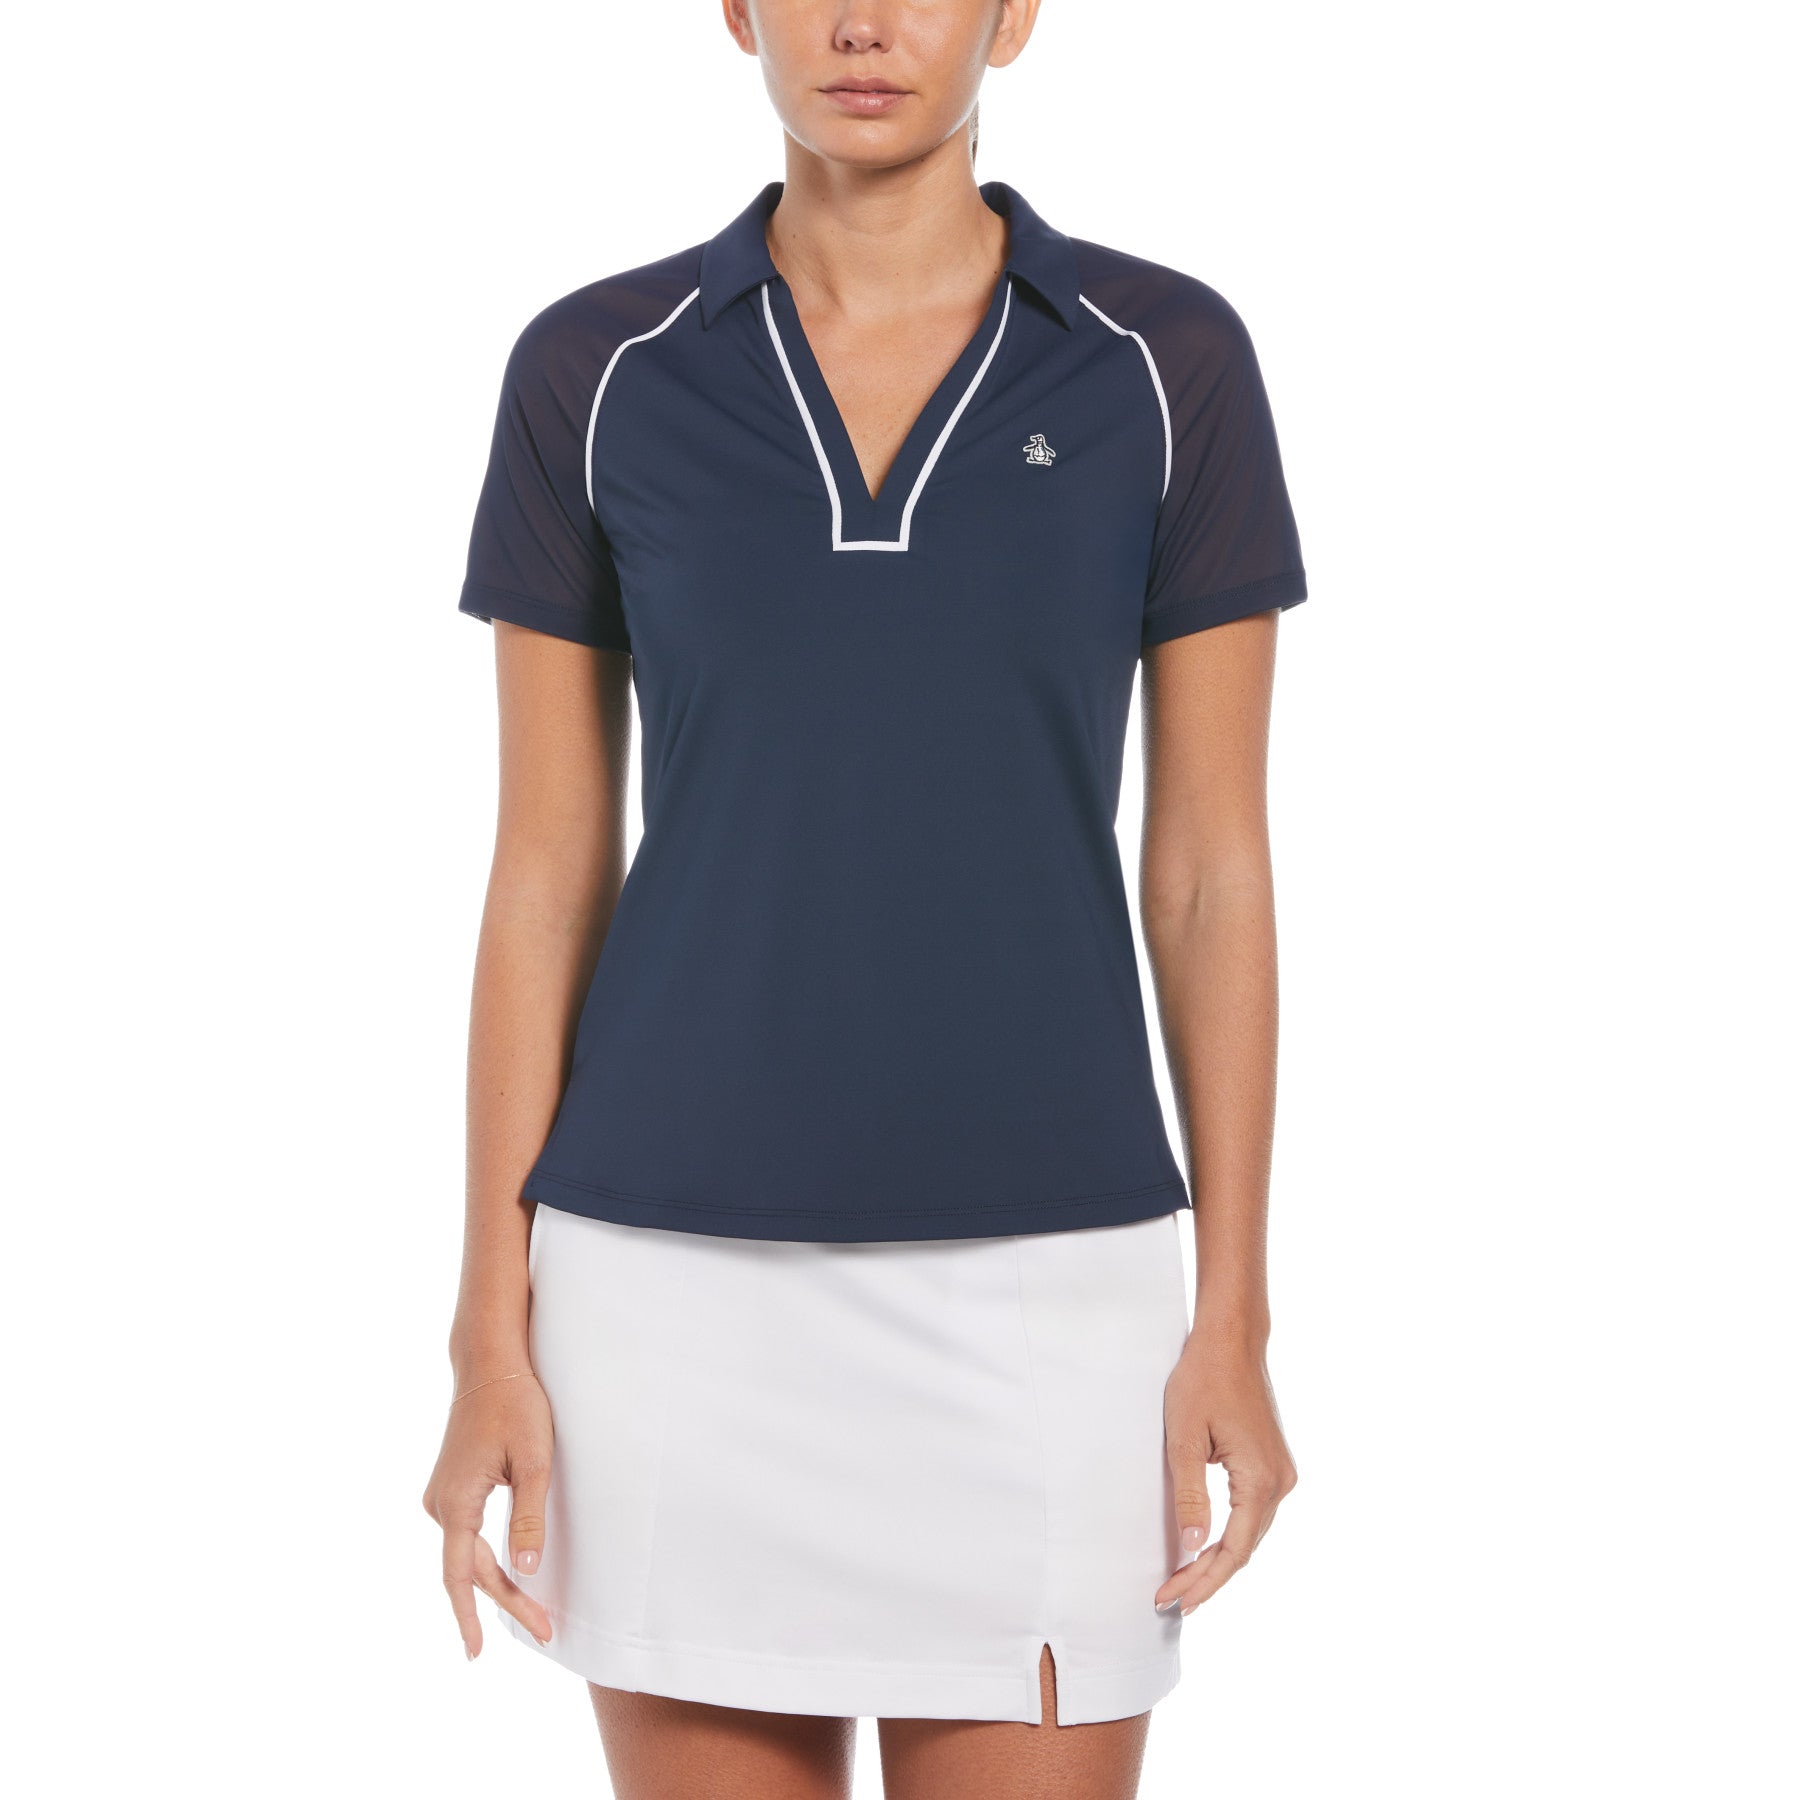 Women’s V-Neck Mesh Block Short Sleeve Golf Polo Shirt With Contrast Piping In Black Iris